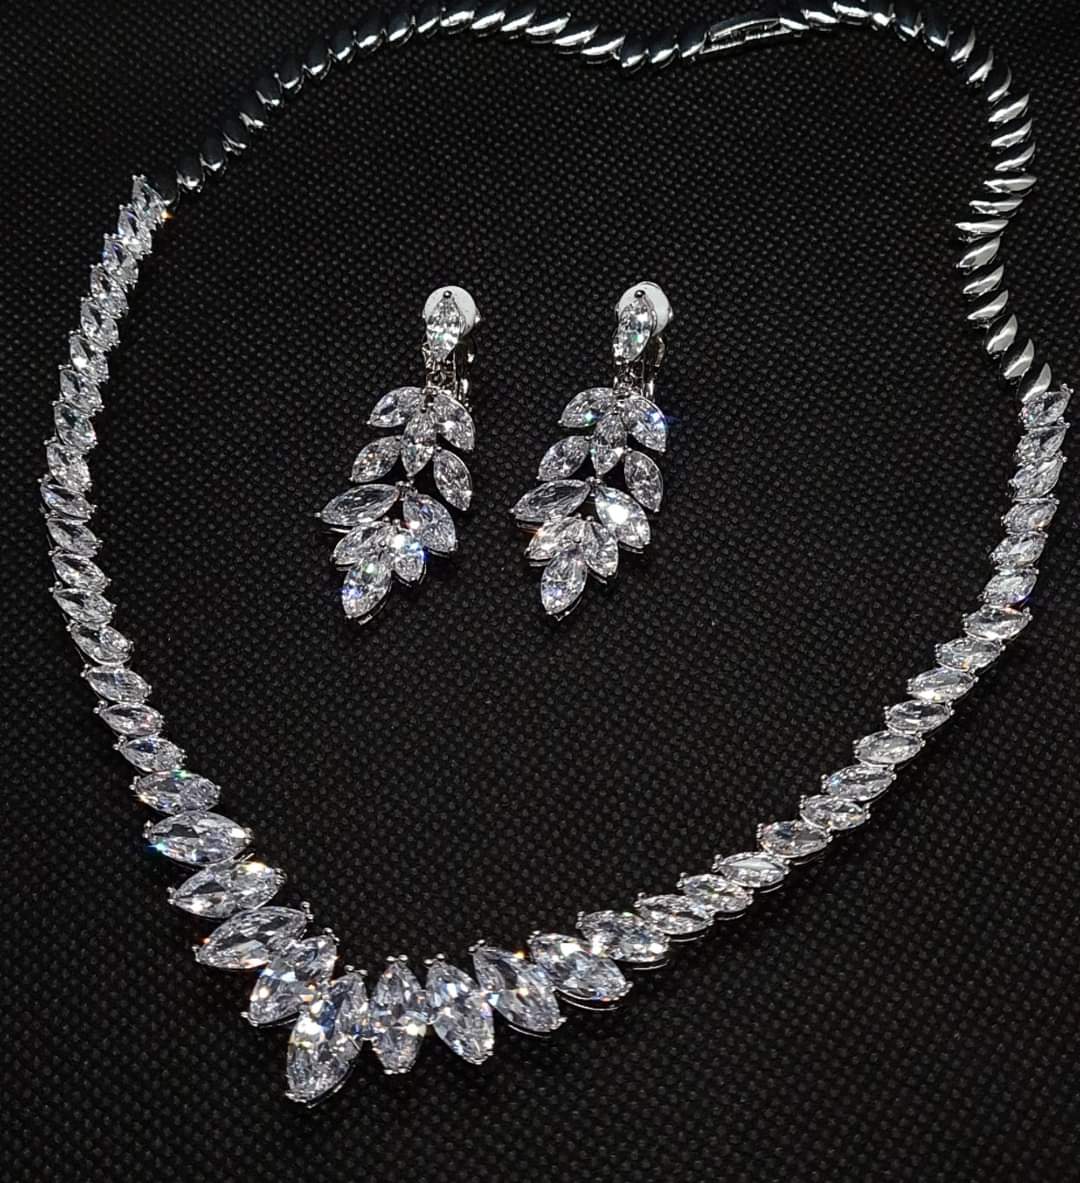 a Stylish Cubic Zirconia Necklace and Earring Jewelry Set with Marquise Cut Design. The Necklace Showcases a Brilliant Marquise Shape Cut CZ Pendant, Complemented by Dangle Drop Earrings of Matching Design. All Set Against a Sleek Black Background,